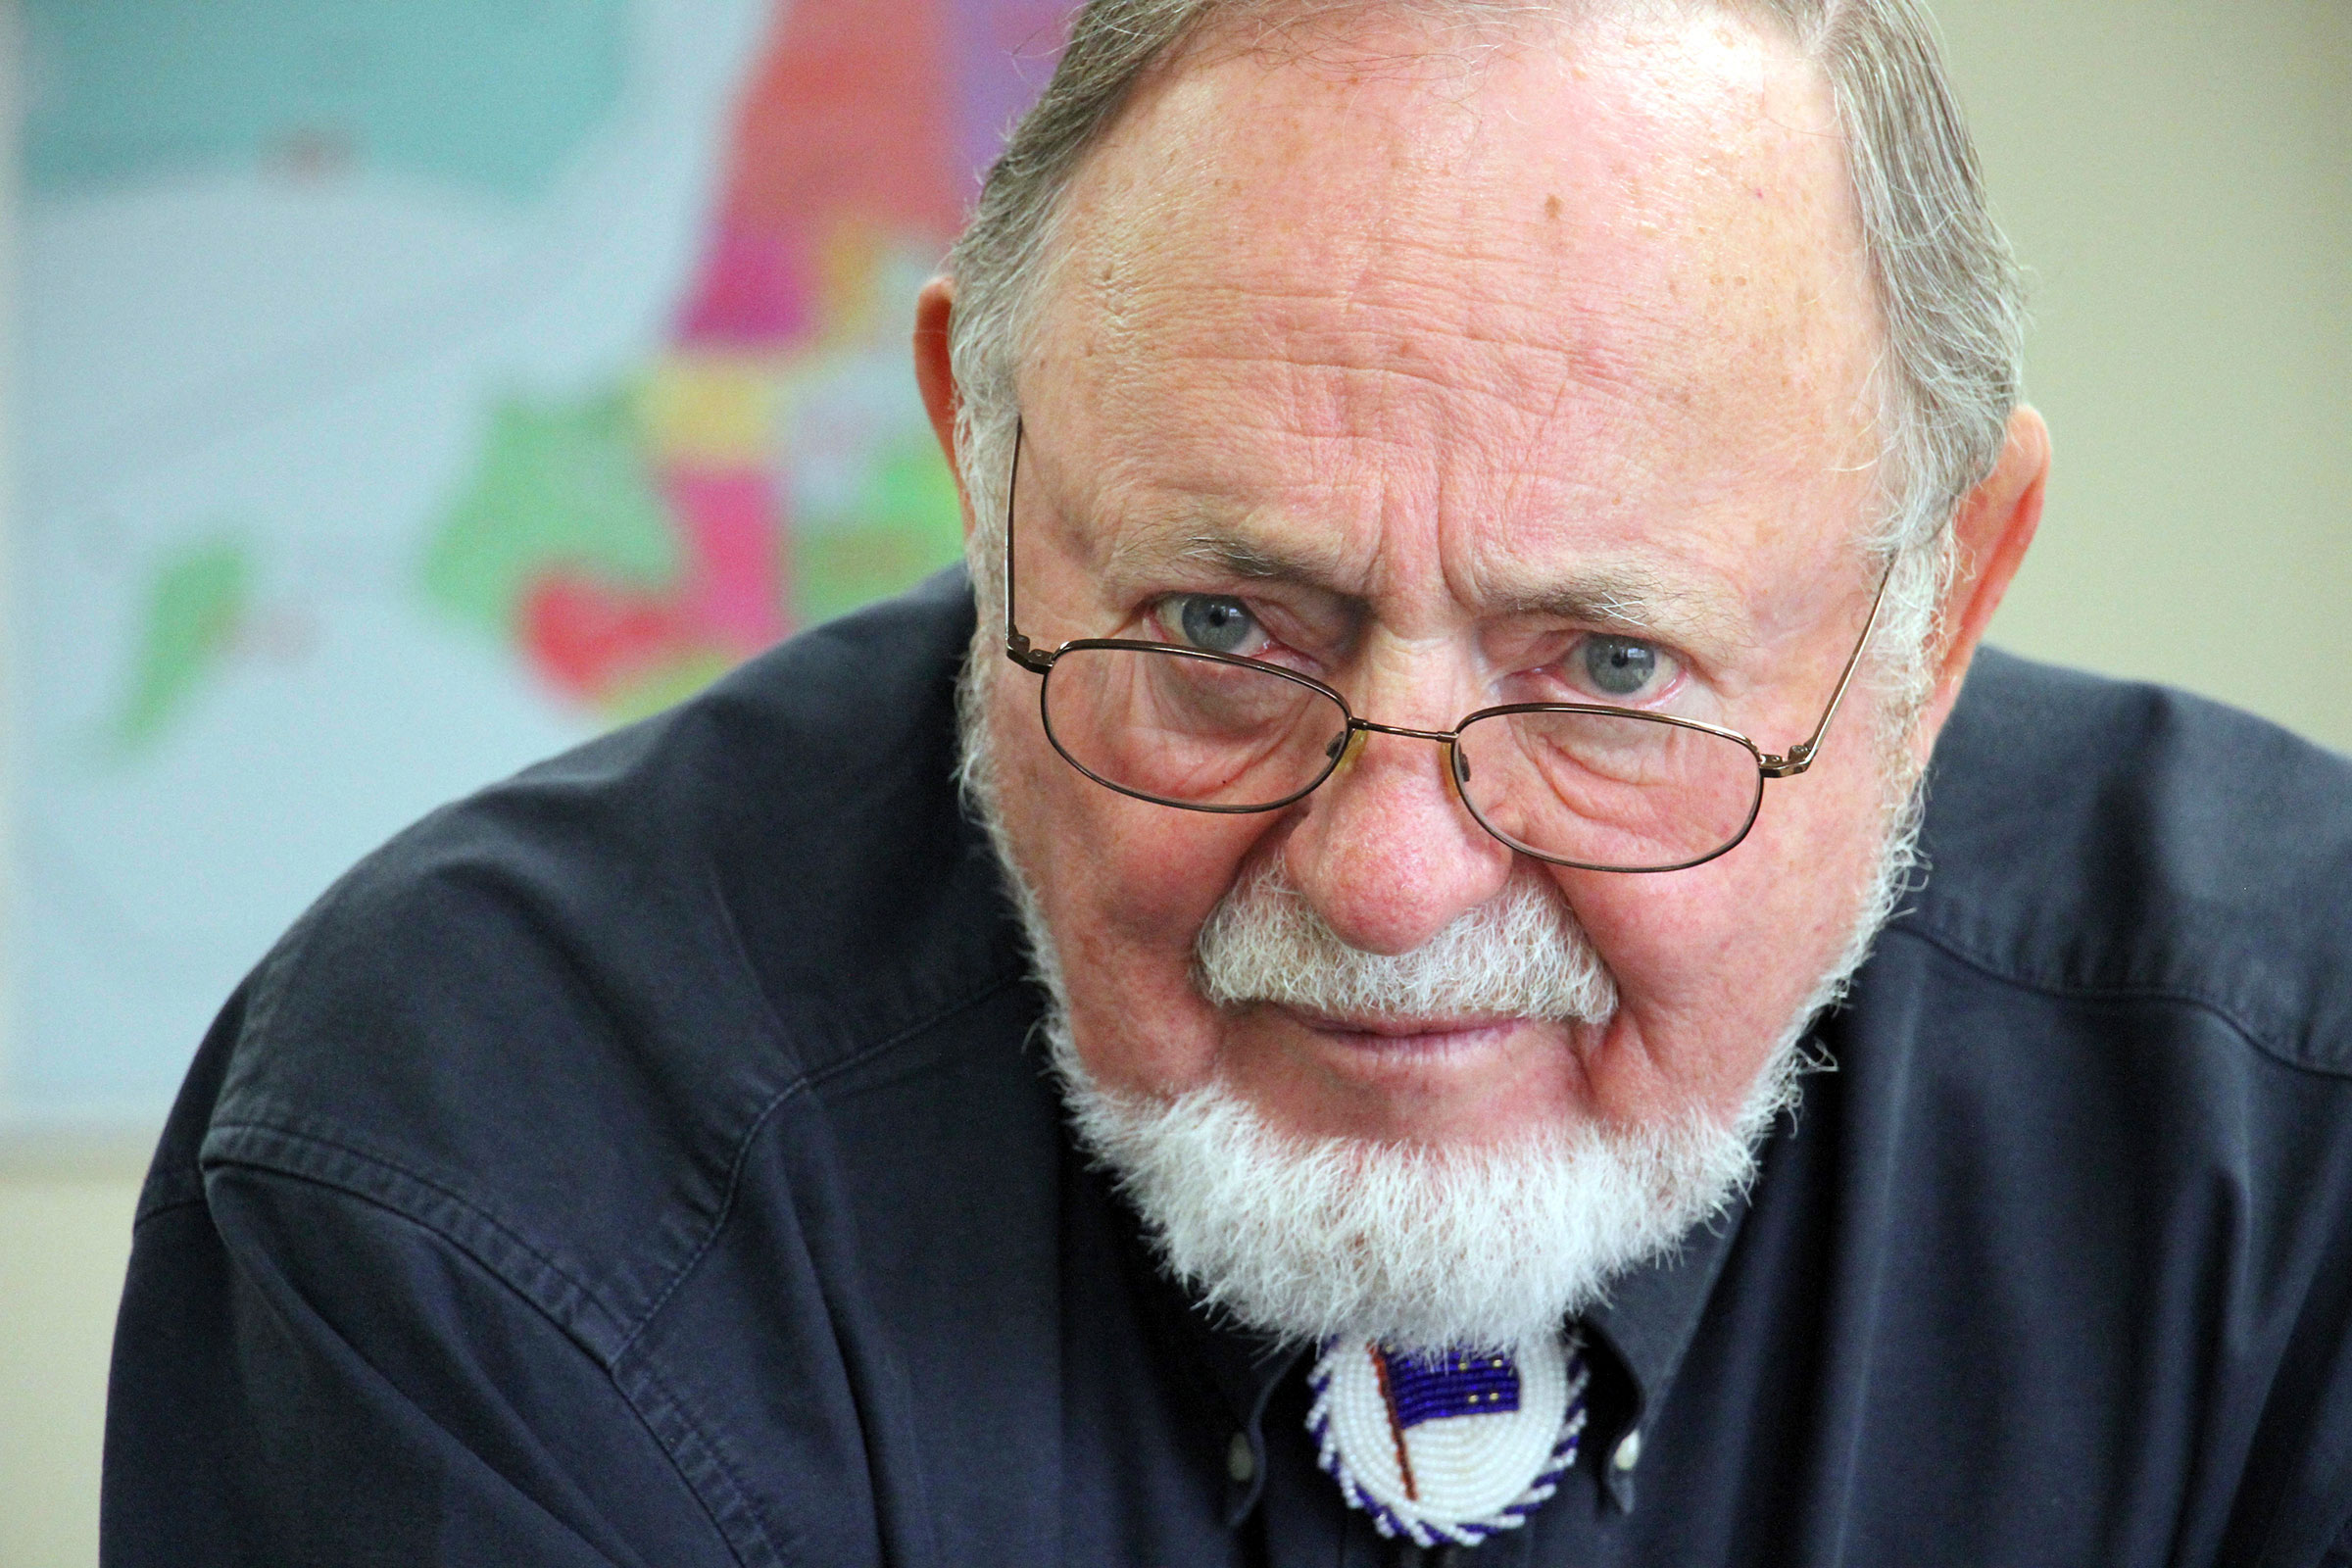 Rep. Don Young speaks with reporters at the Alaska Division of Elections on June 28, 2019 in Anchorage, Alaska.